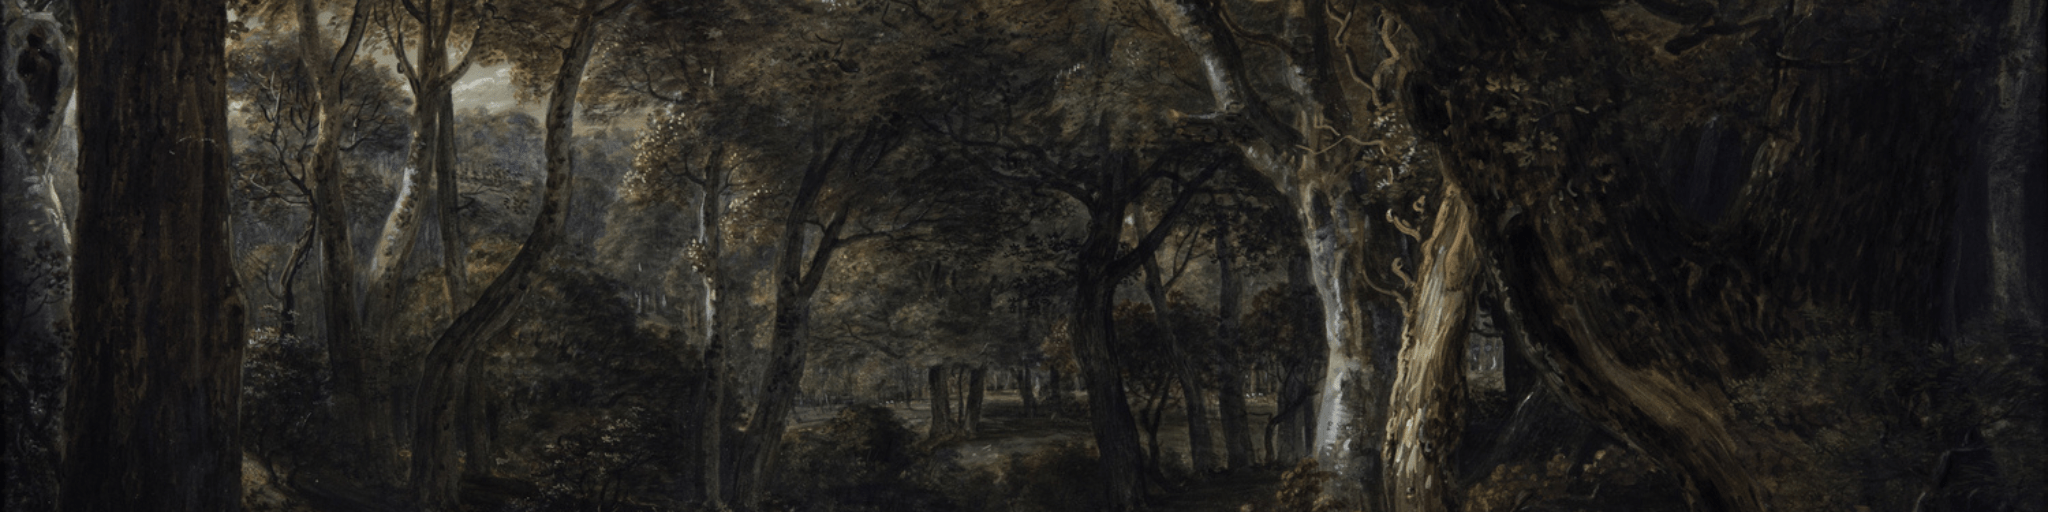 PAUL SANDBY, A scene in Windsor Forest, 1801, gouache and wash on paper on canvas. Purchased with the assistance of a special grant from the Government of Victoria 1971